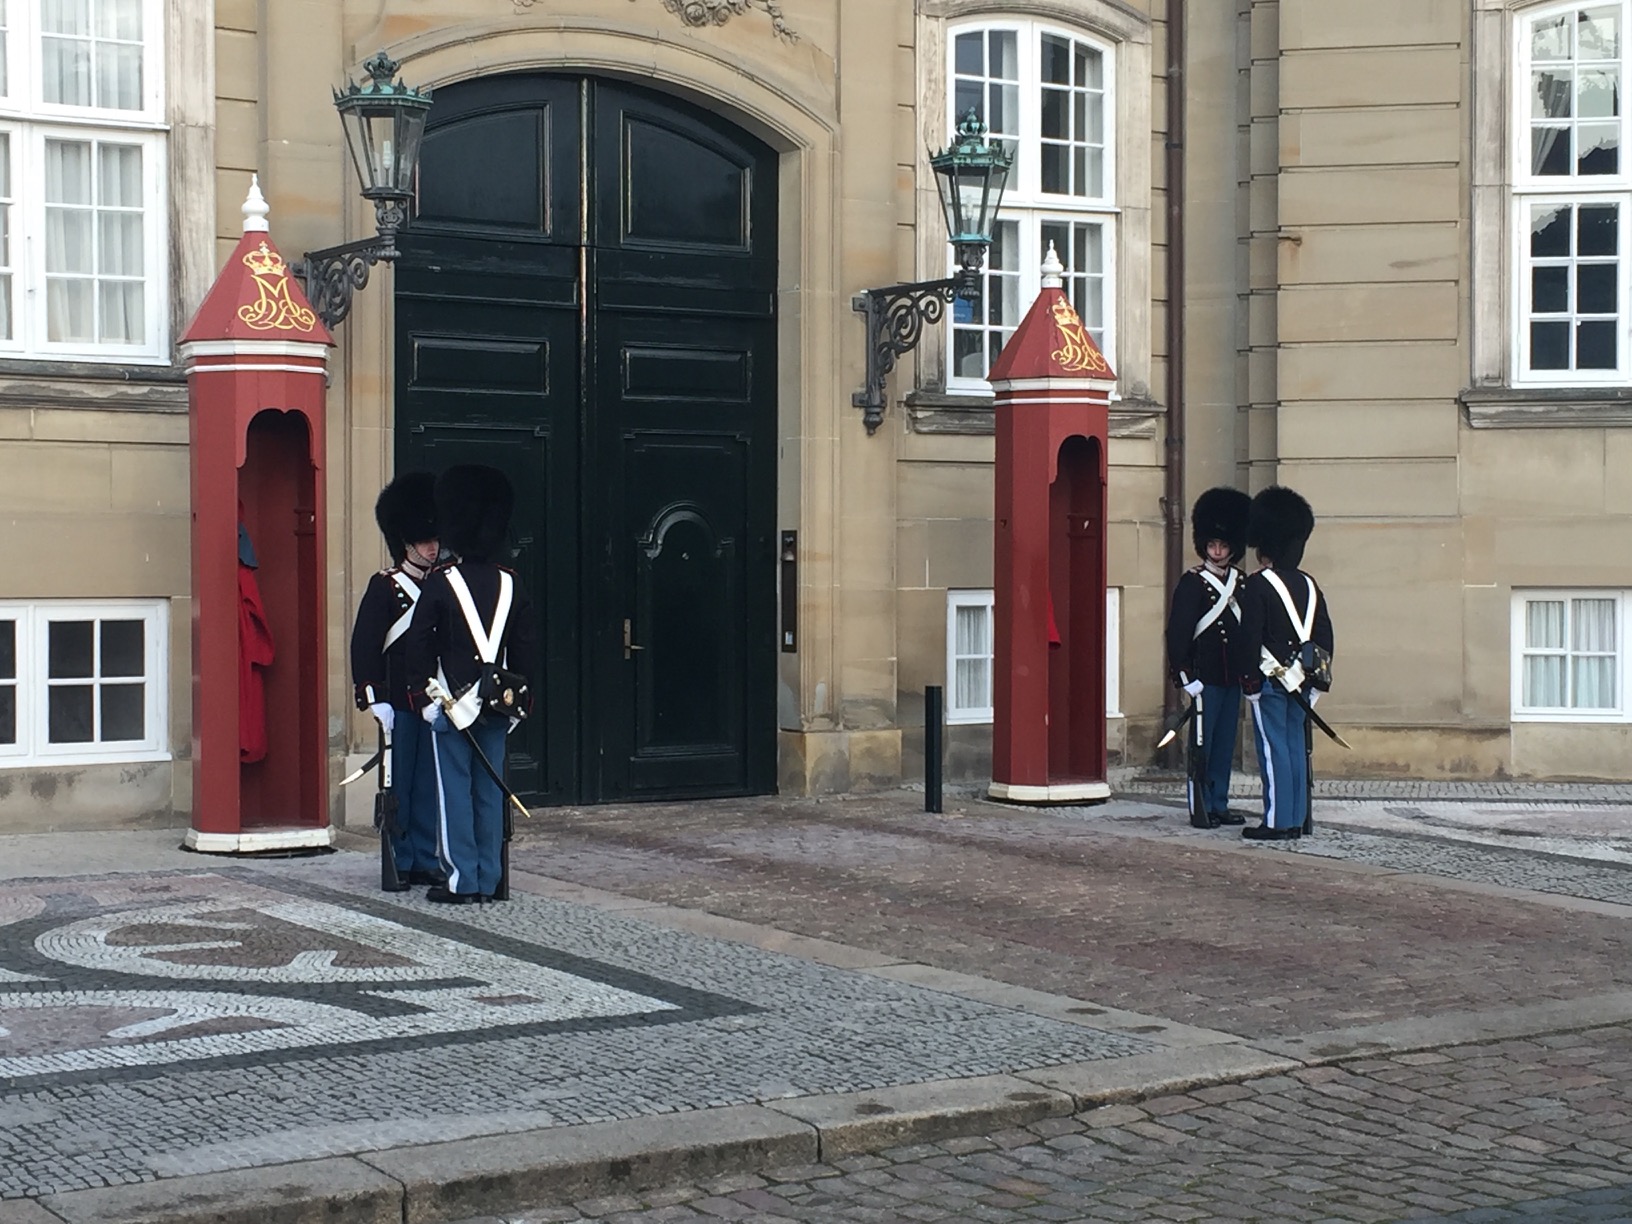 Two pairs of guards dressed in blue pants, black jackets, and tall, furry hats, face one another before two red booths a wide, black doorway into a stone building.